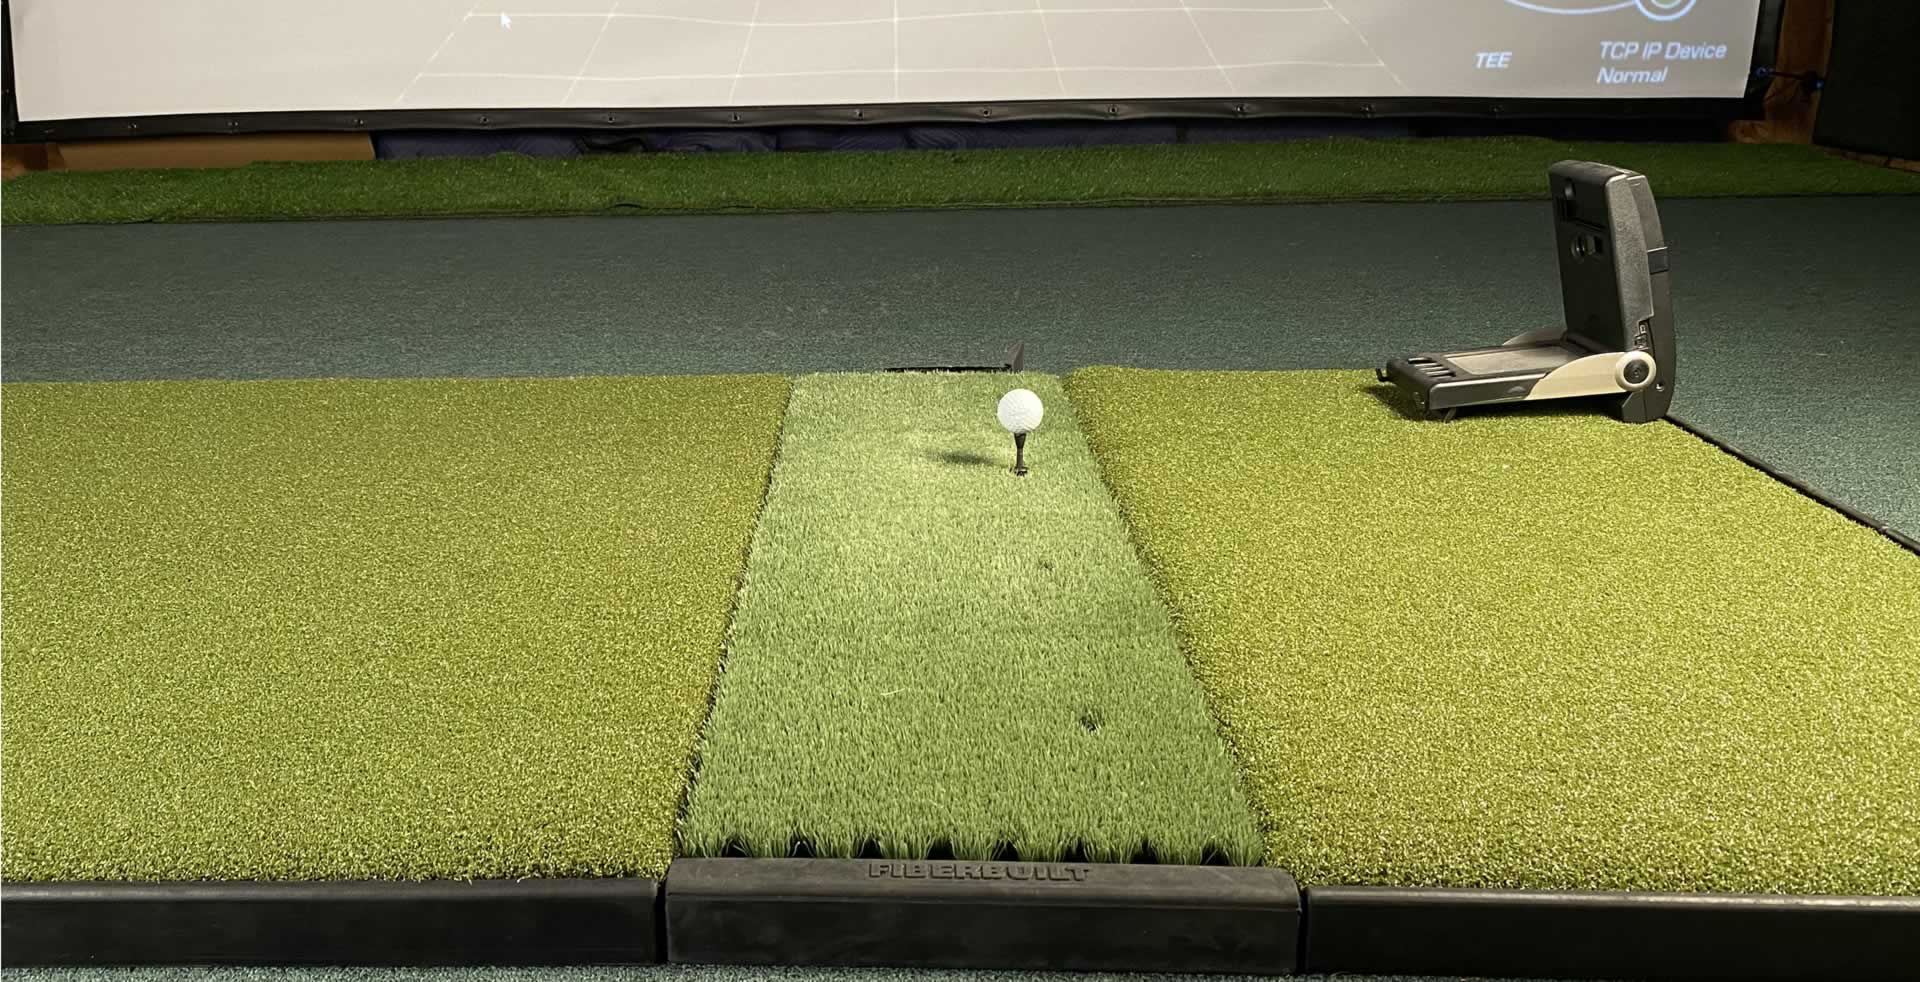 Ready for flooring and putting green, need help - Golf Simulator Forum